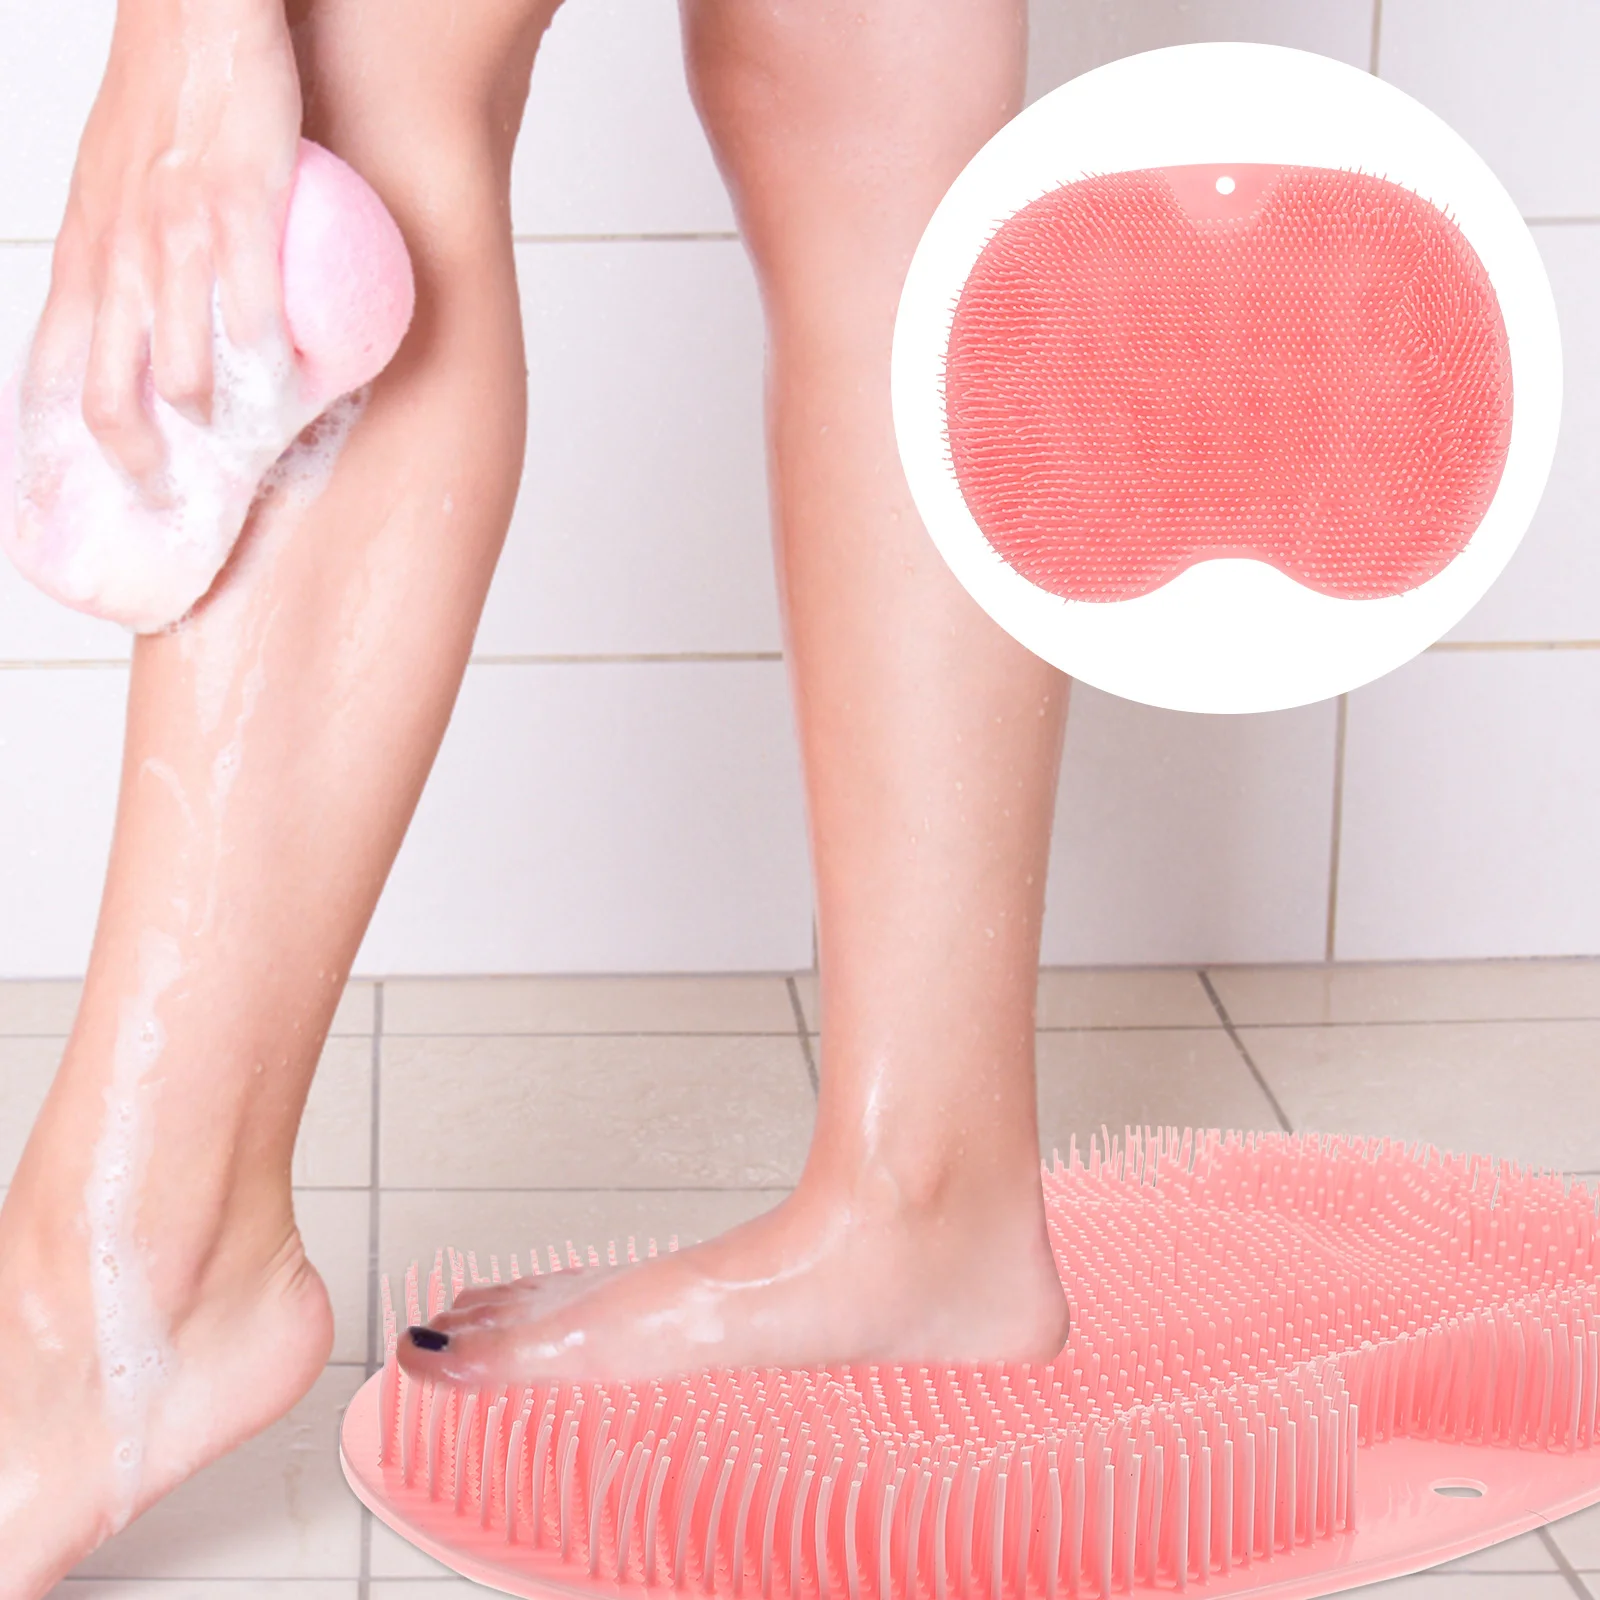 

Foot Shower Scrubber Matbrush Cleaner Massagerbathpad Feet Wash Useacupressure Suction Scrubbers Cup Spa Body Floor Scrubbing